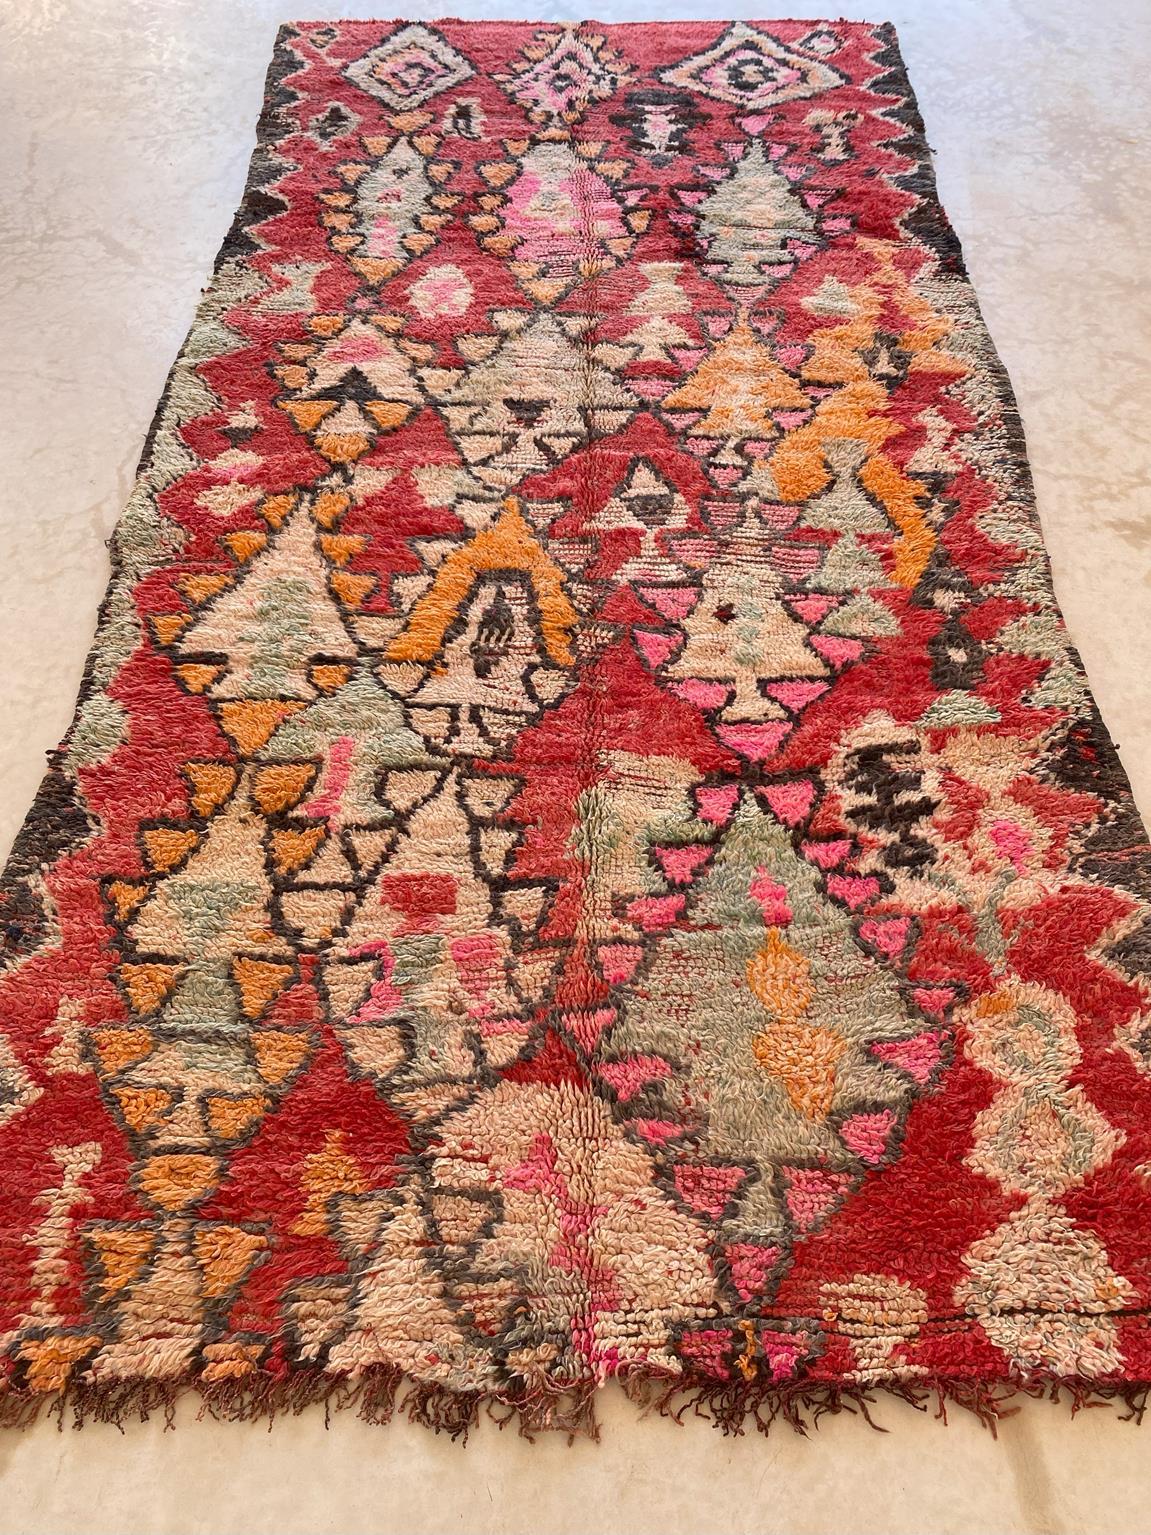 20th Century Vintage Moroccan Rehamna rug - Red/pink - 5.9x12.2feet / 180x373cm For Sale